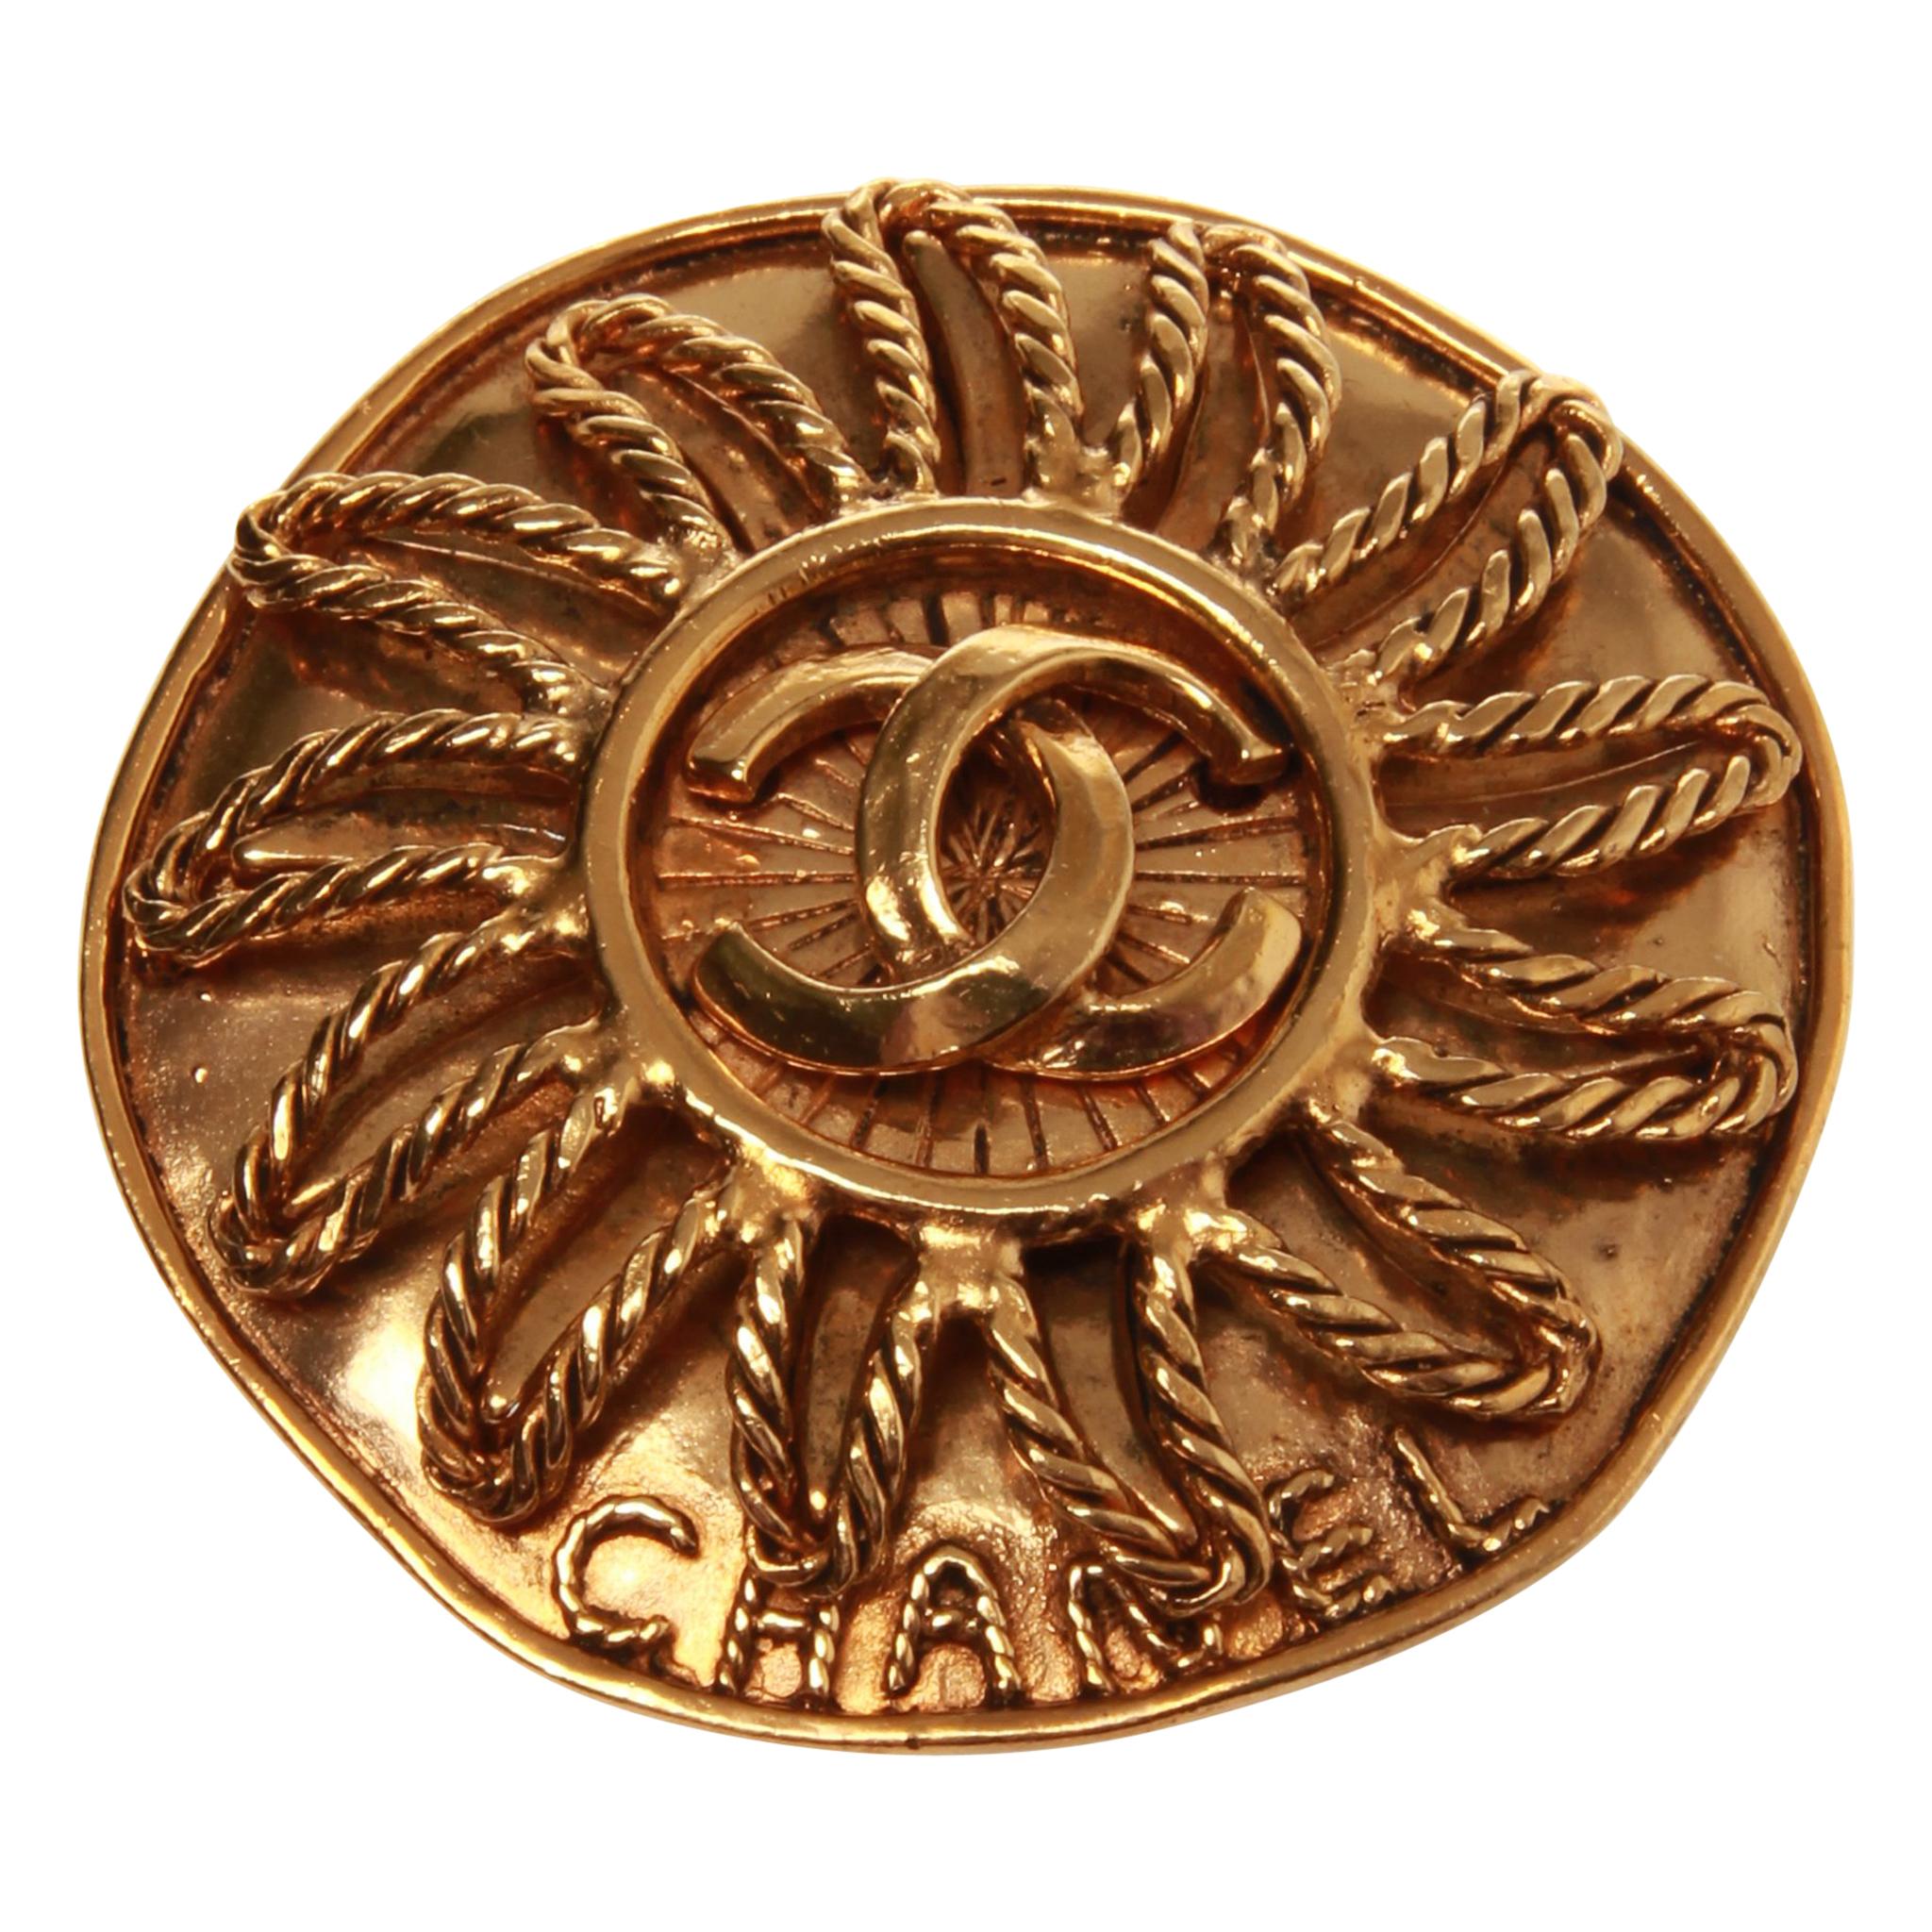 Chanel gold sun brooch with double CC